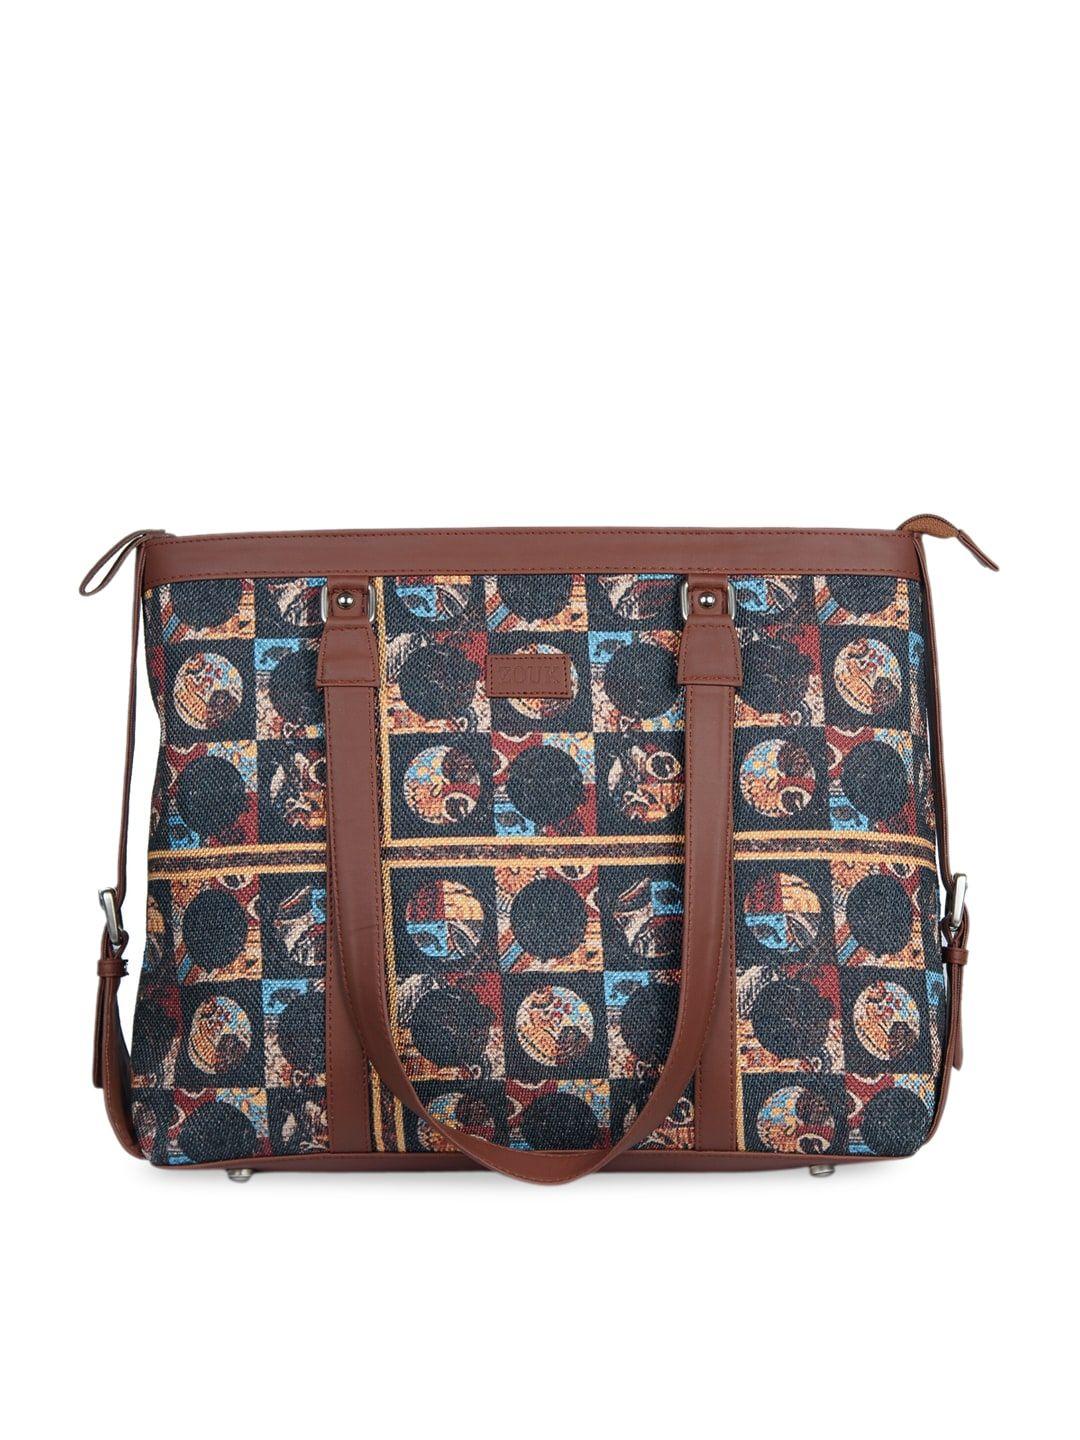 zouk charcoal grey & yellow printed leather handcrafted 16 inch laptop sustainable shoulder bag